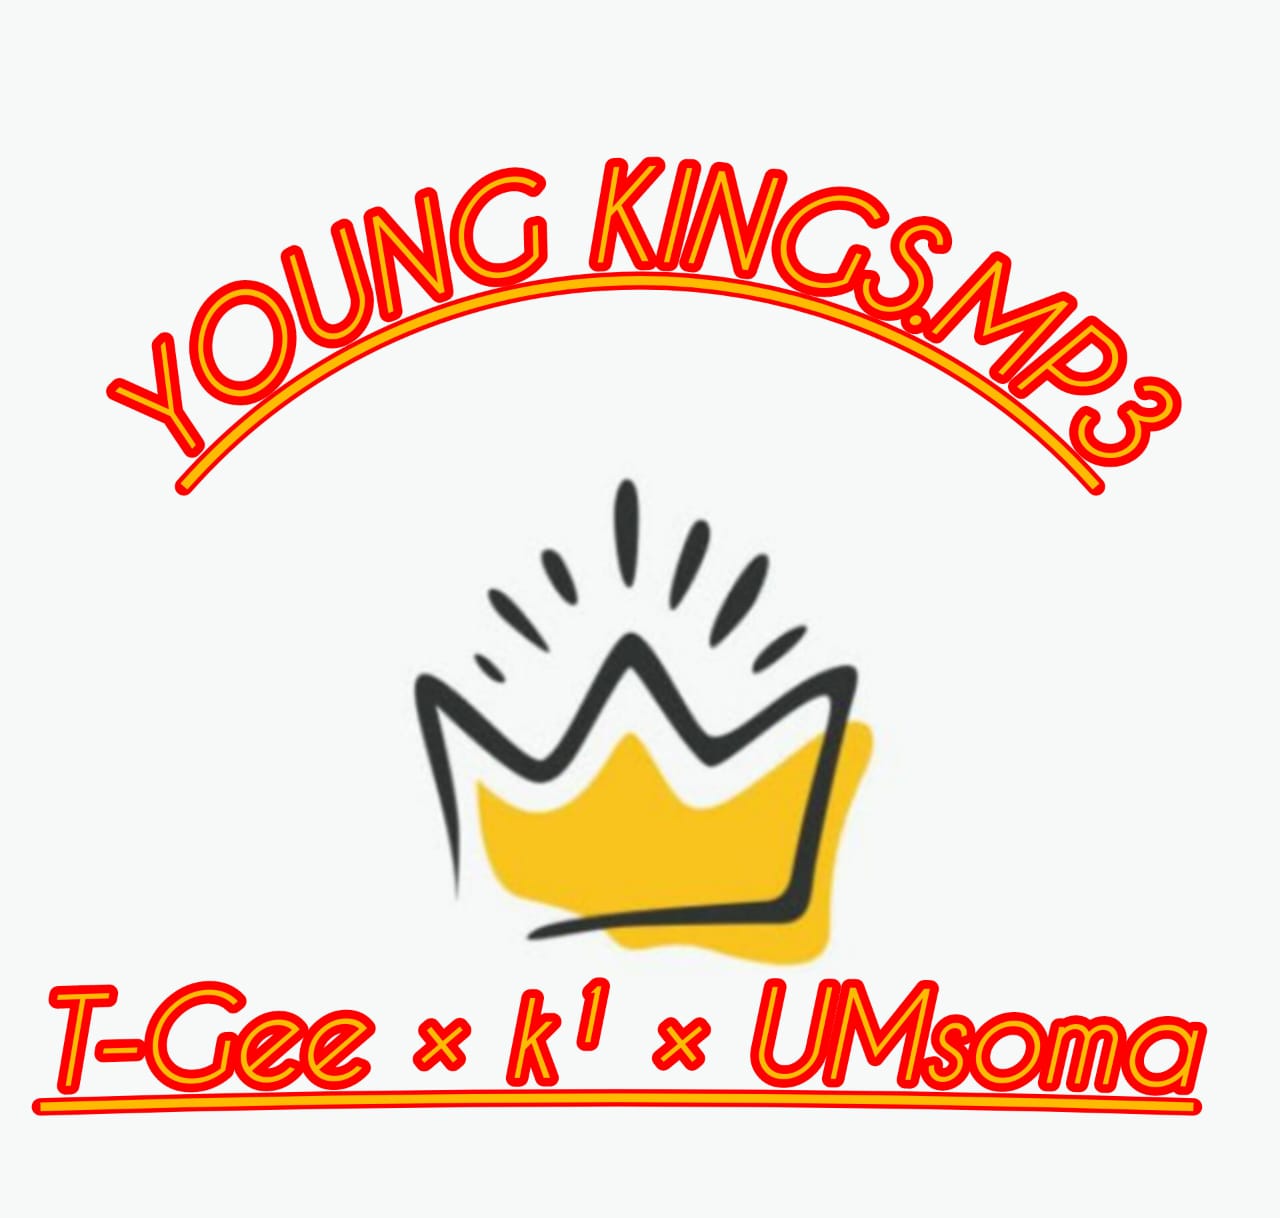 YOUNG KINGS.Mp3 - T-Gee × K¹  ×  UMsoma